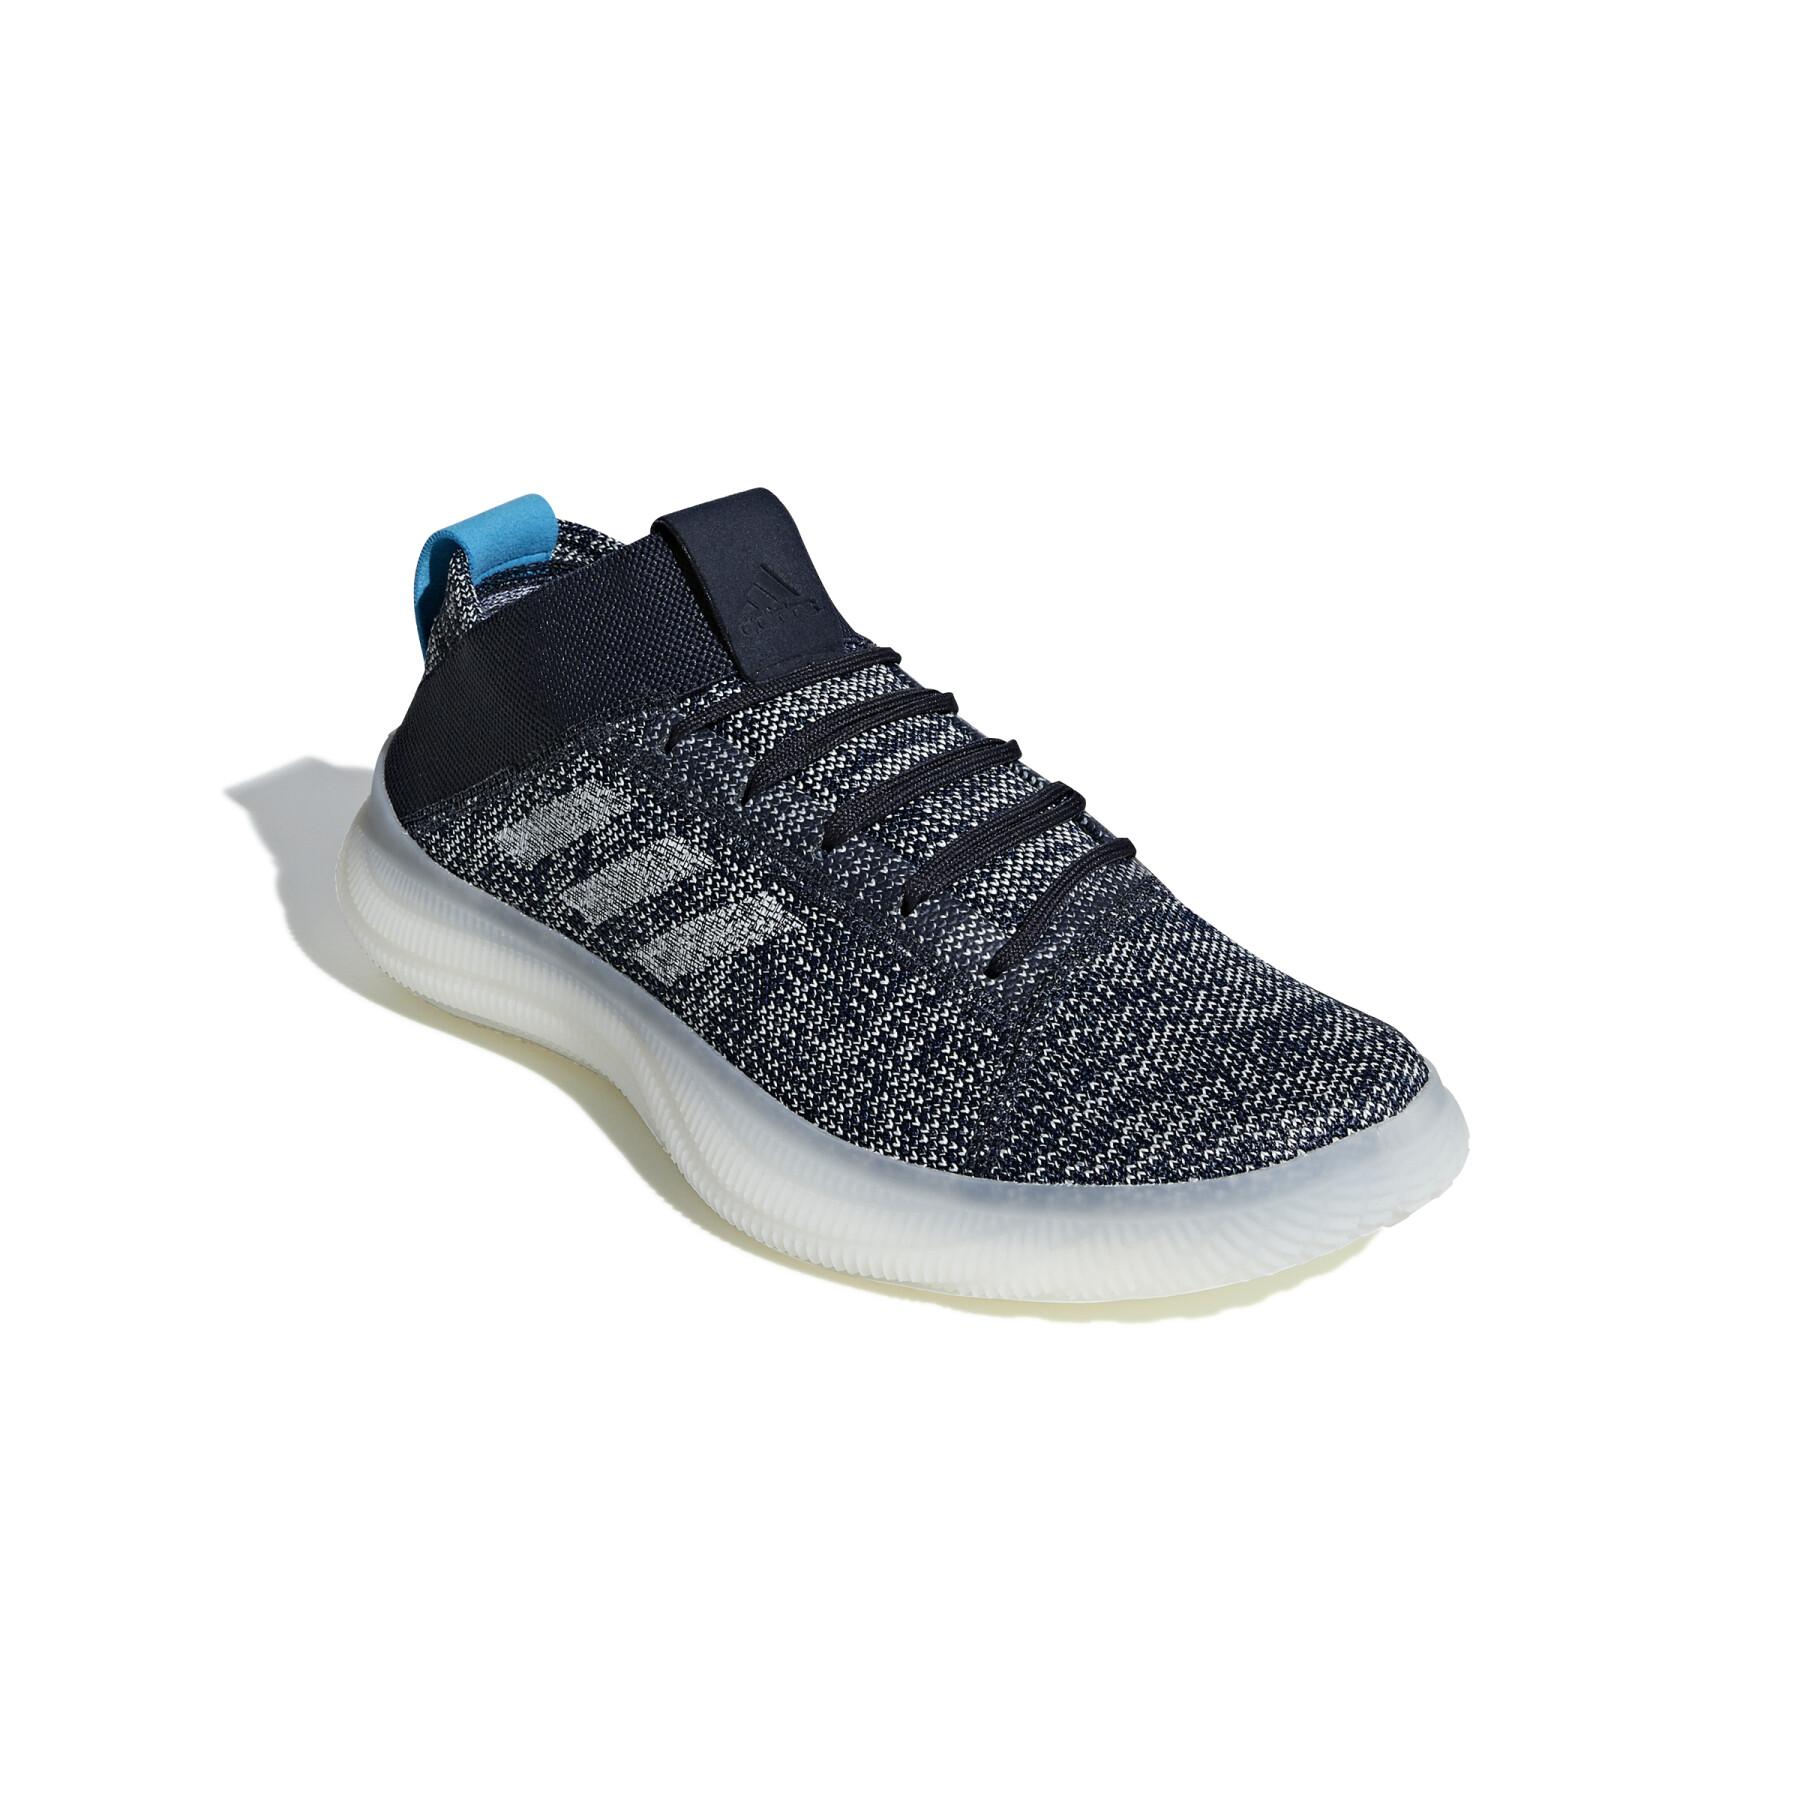 Shoes adidas Pureboost Trainer